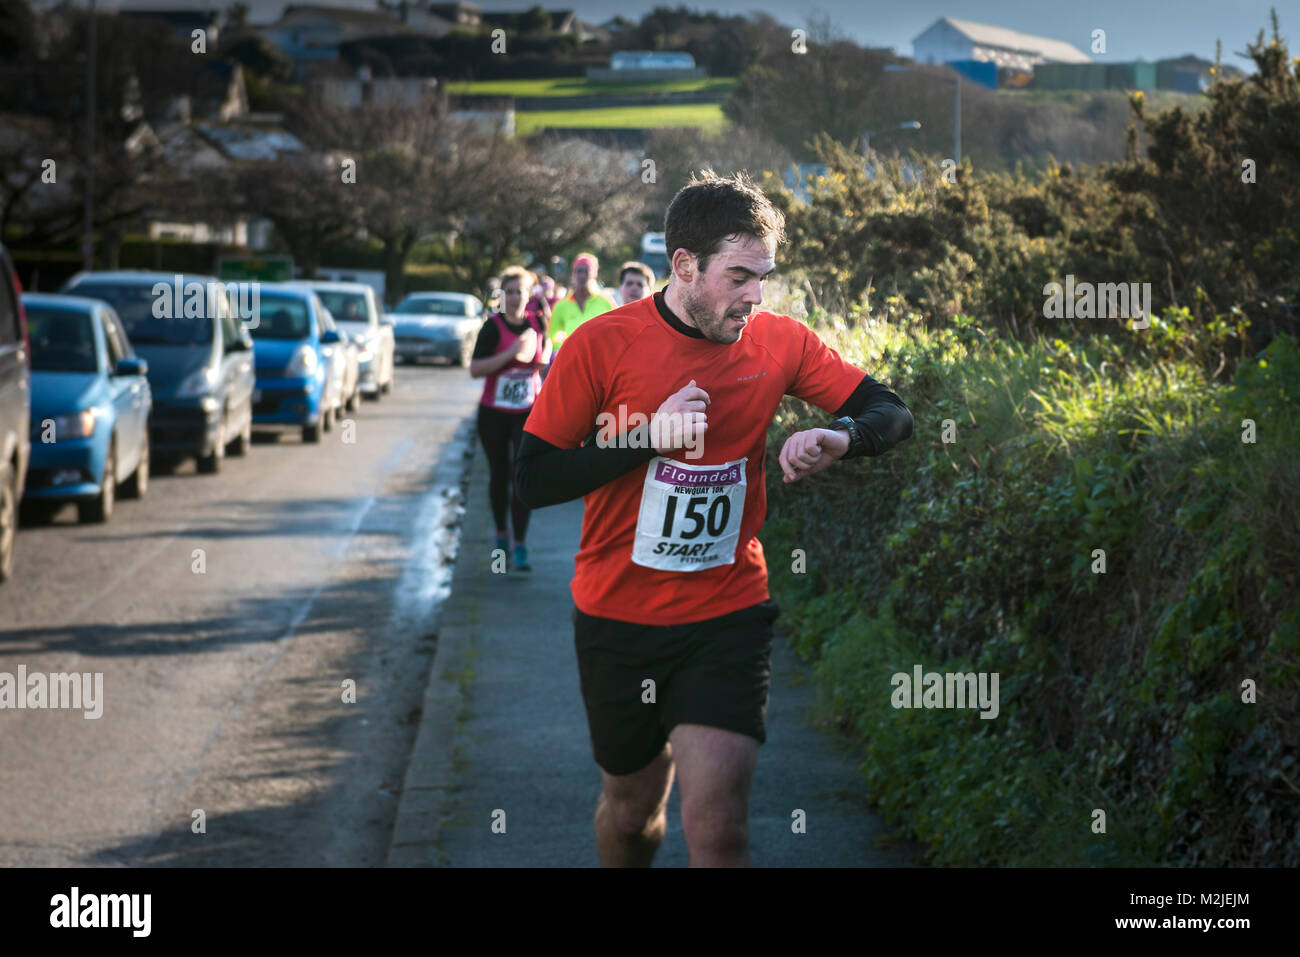 A runner checking his time during a road race in Newquay Cornwall. Stock Photo